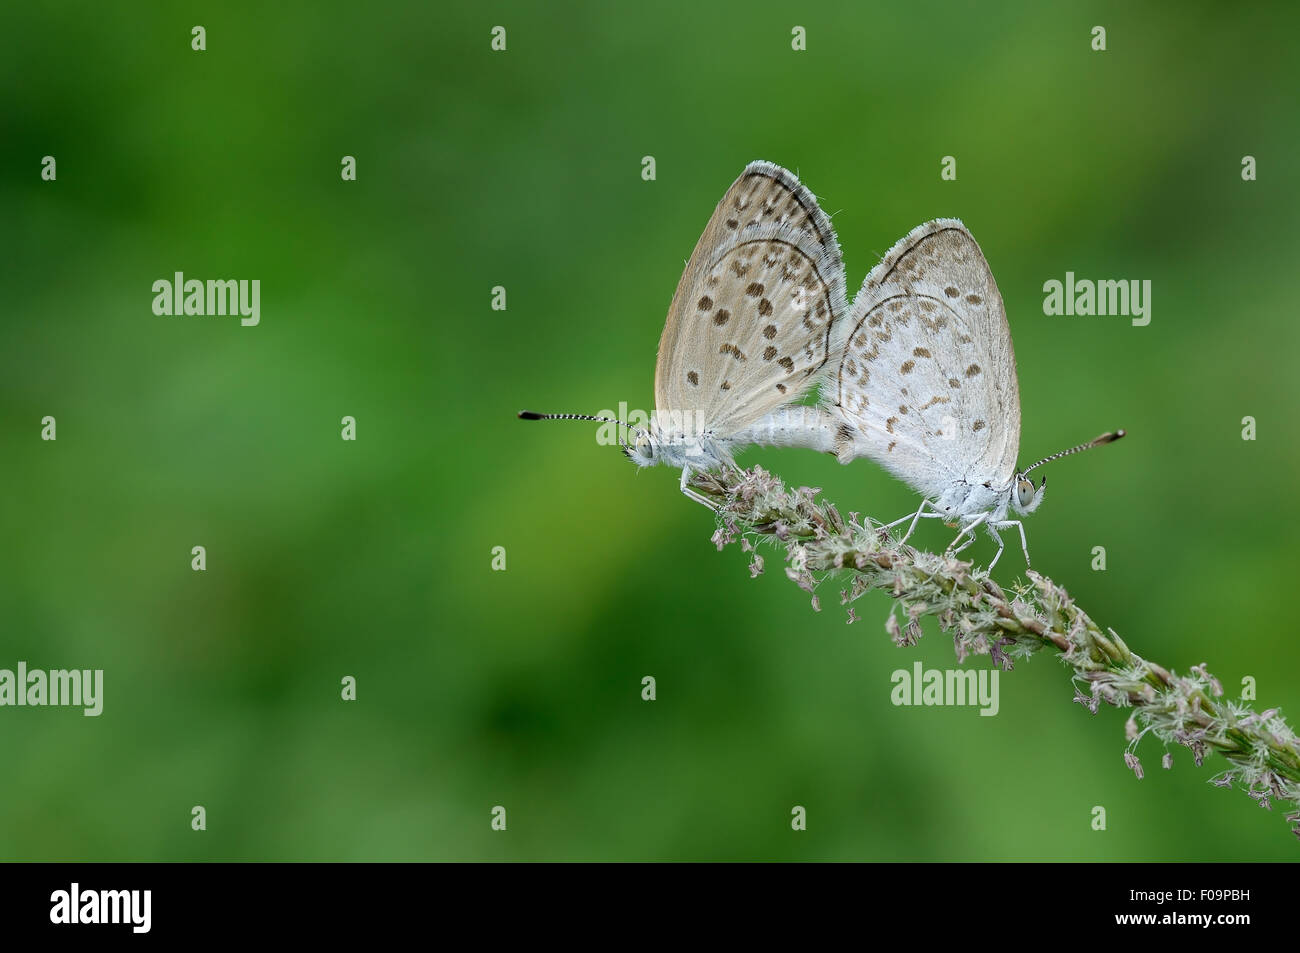 Mating Butterflies on the field Stock Photo